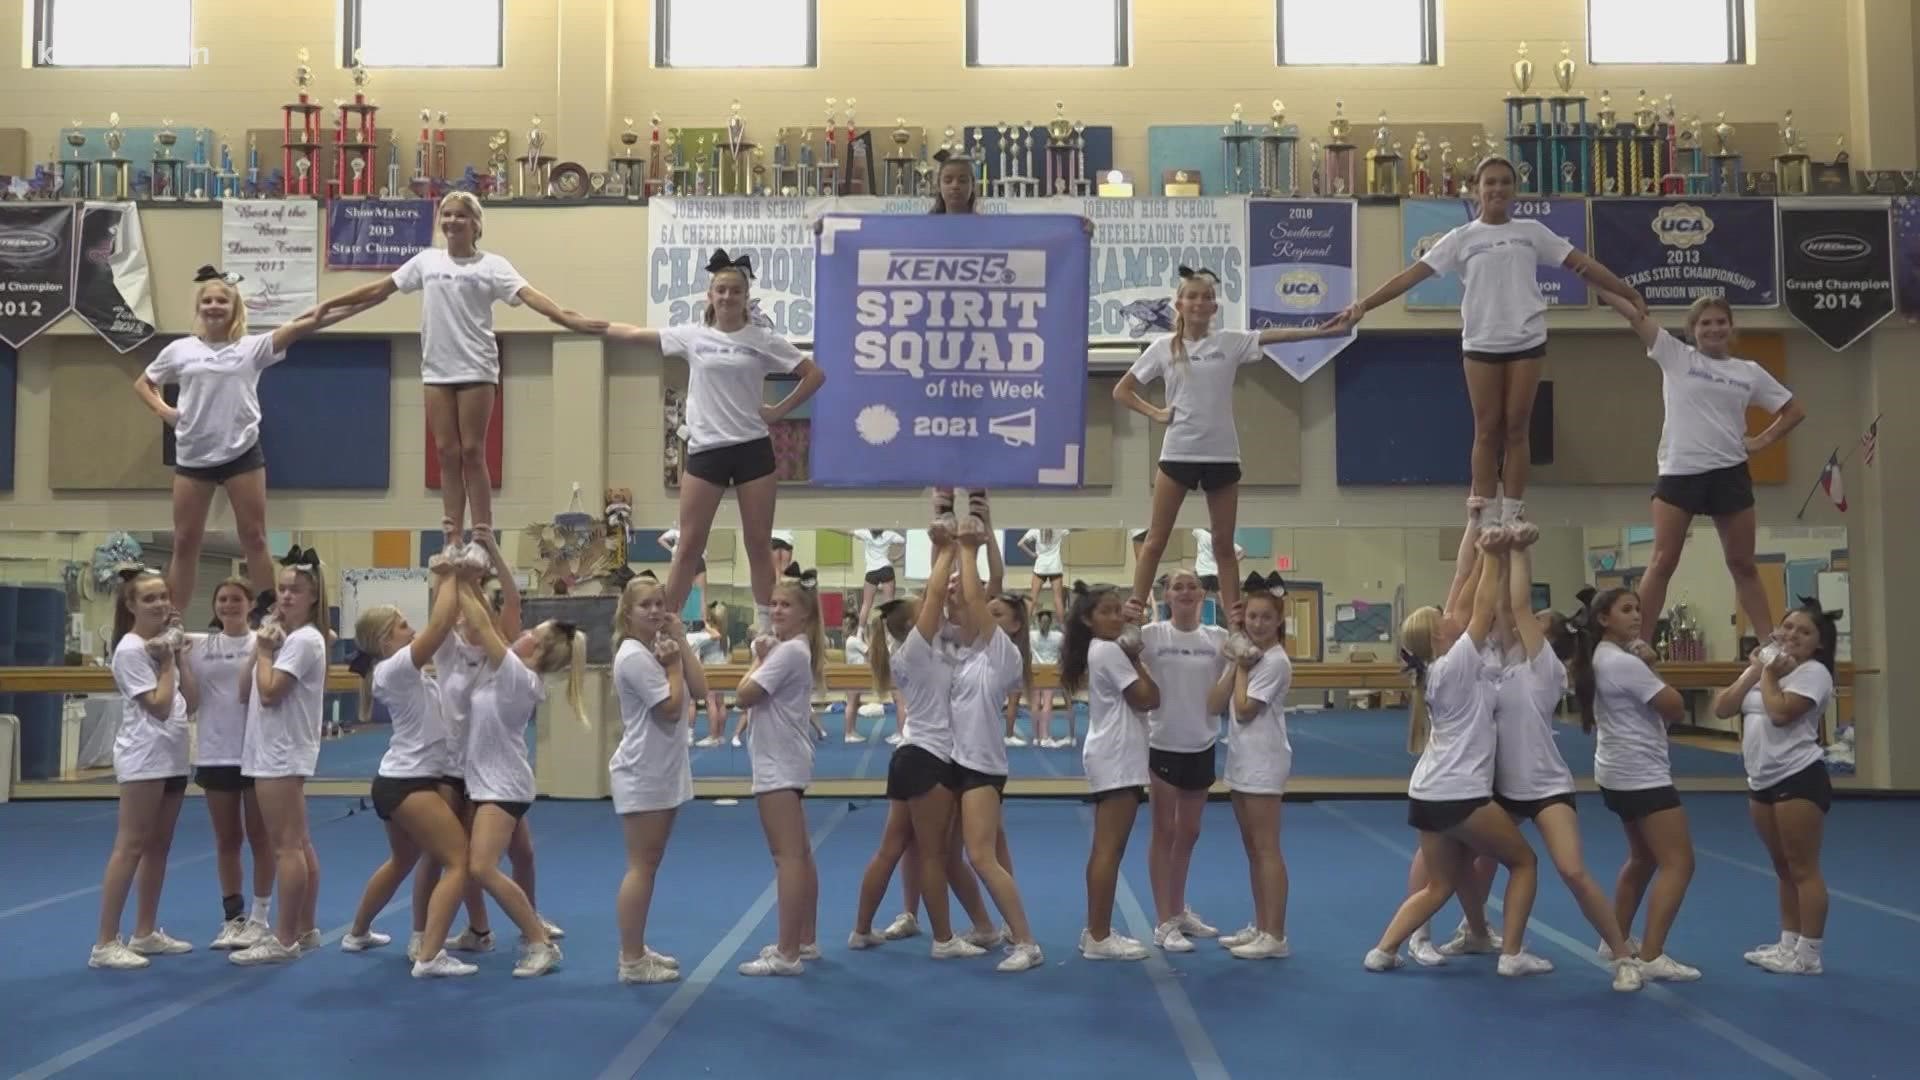 After taking home silver three years in a row, Johnson revamped their competition routine, hoping it brings home gold.